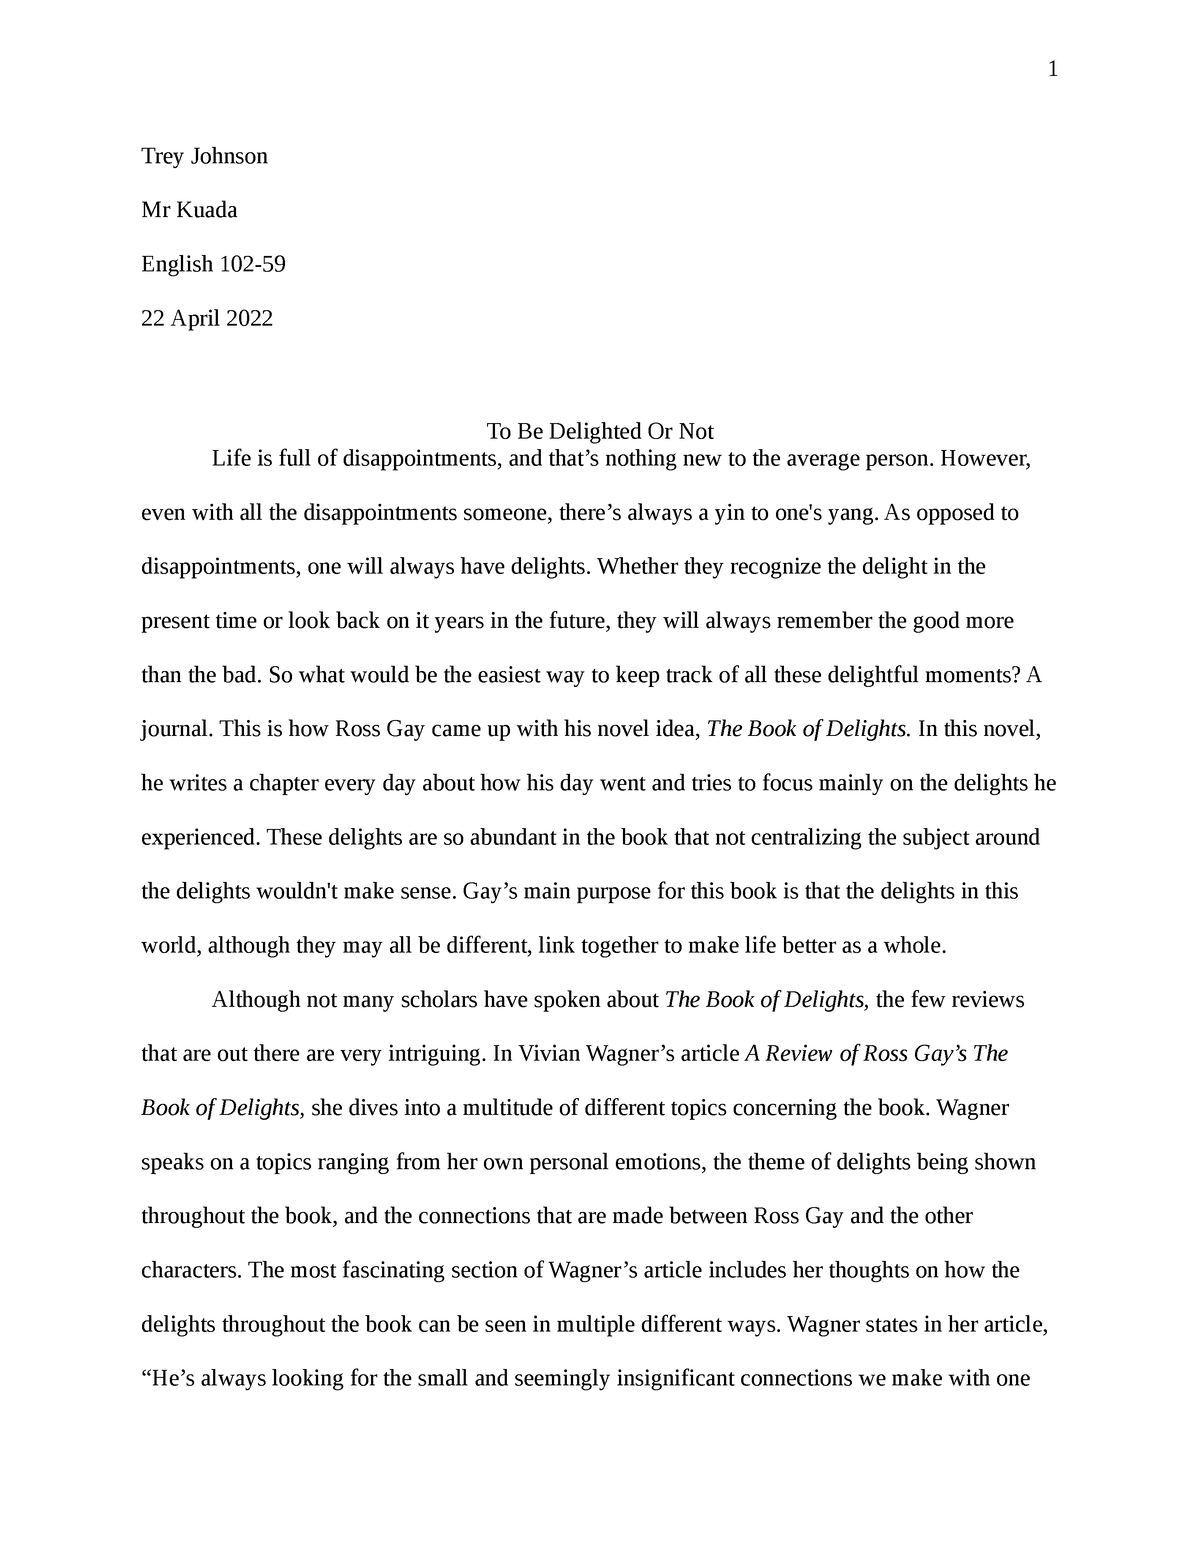 the book of delights essay